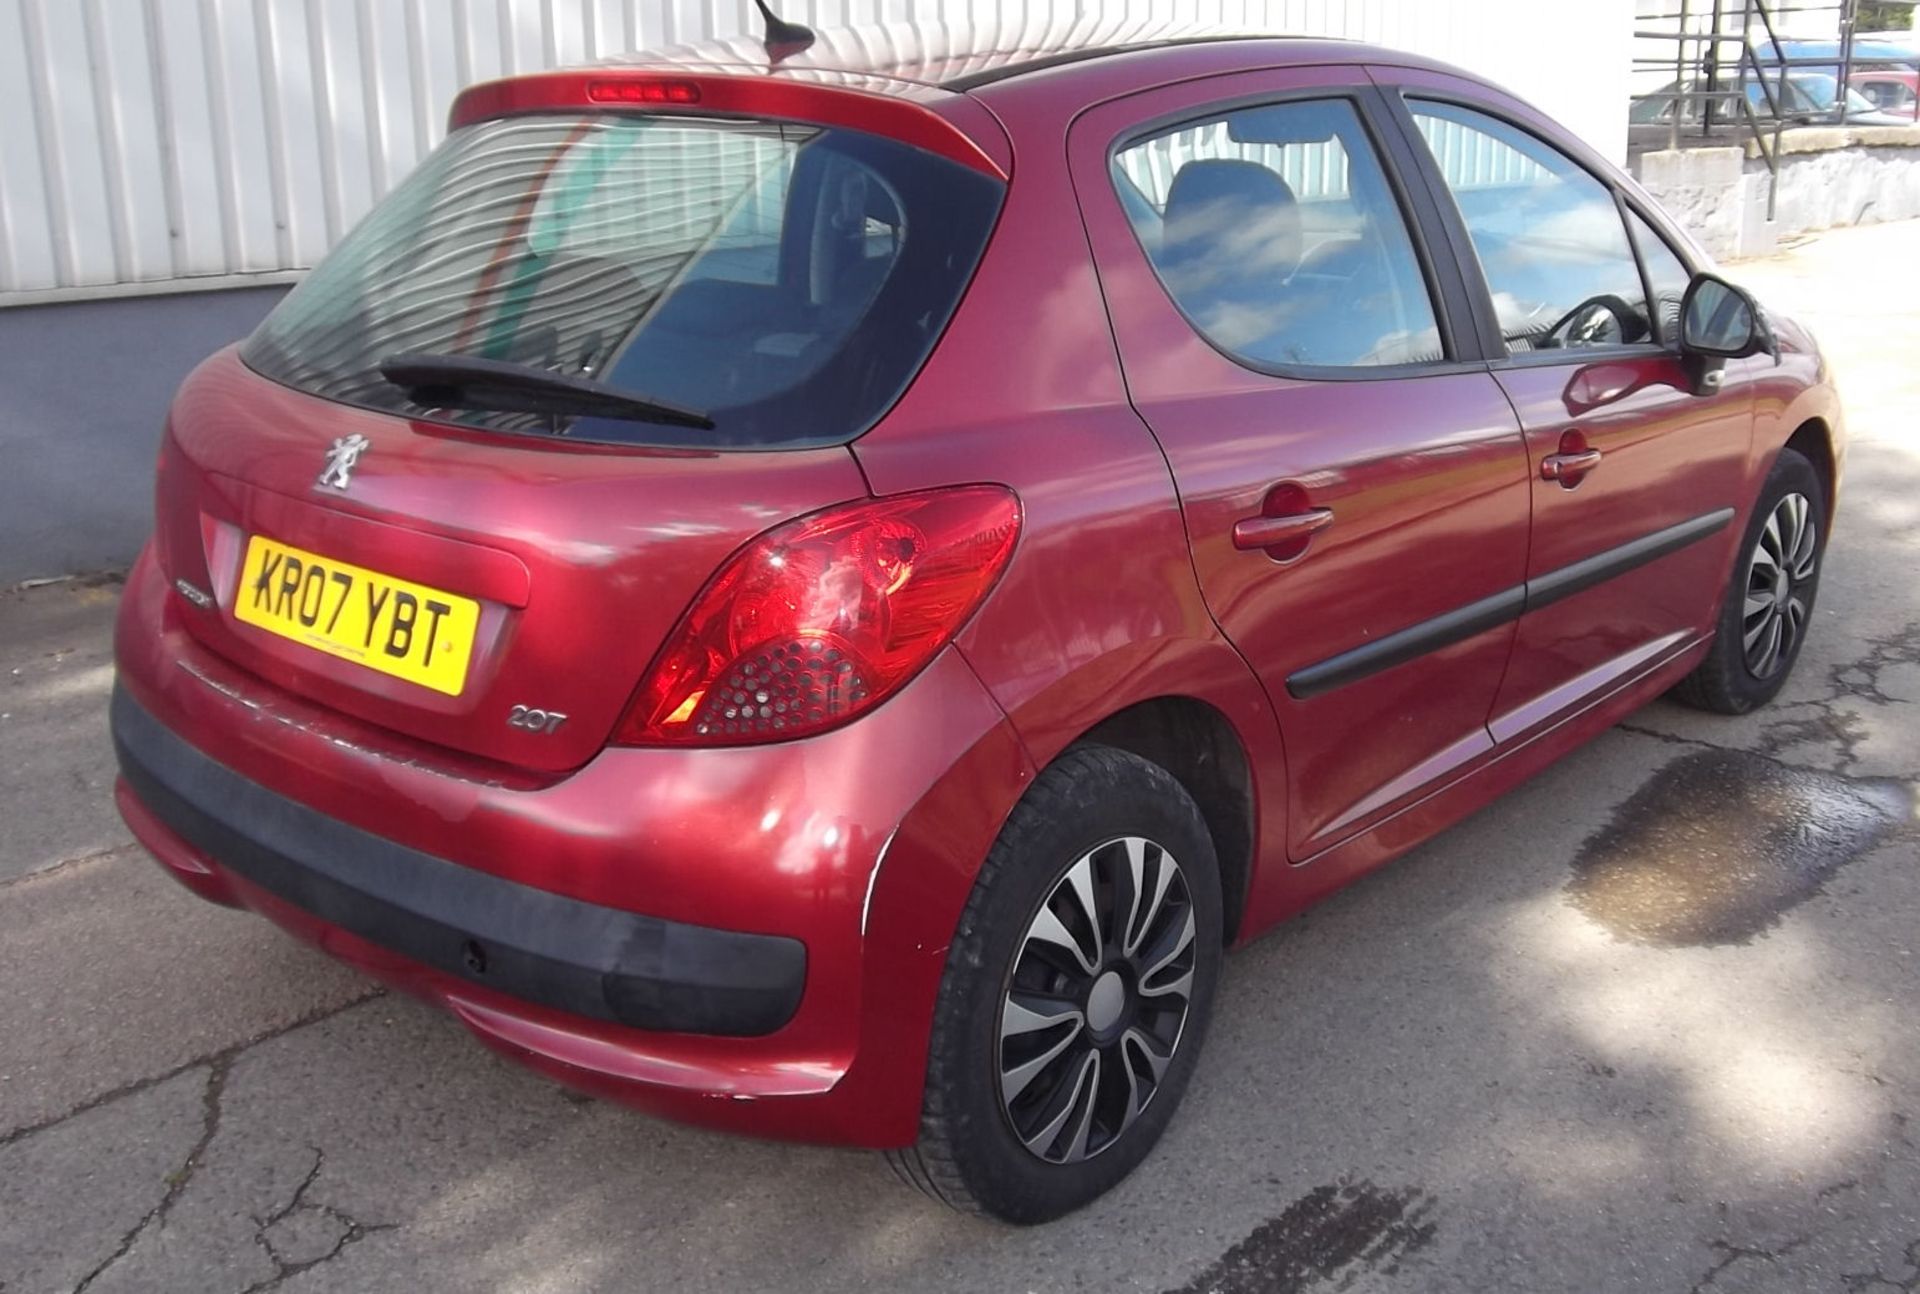 2007 Peugeot 207 1.6 HdiS 5 Door Hatchback - CL505 - NO VAT ON THE HAMMER - Location: Corby - Image 3 of 9